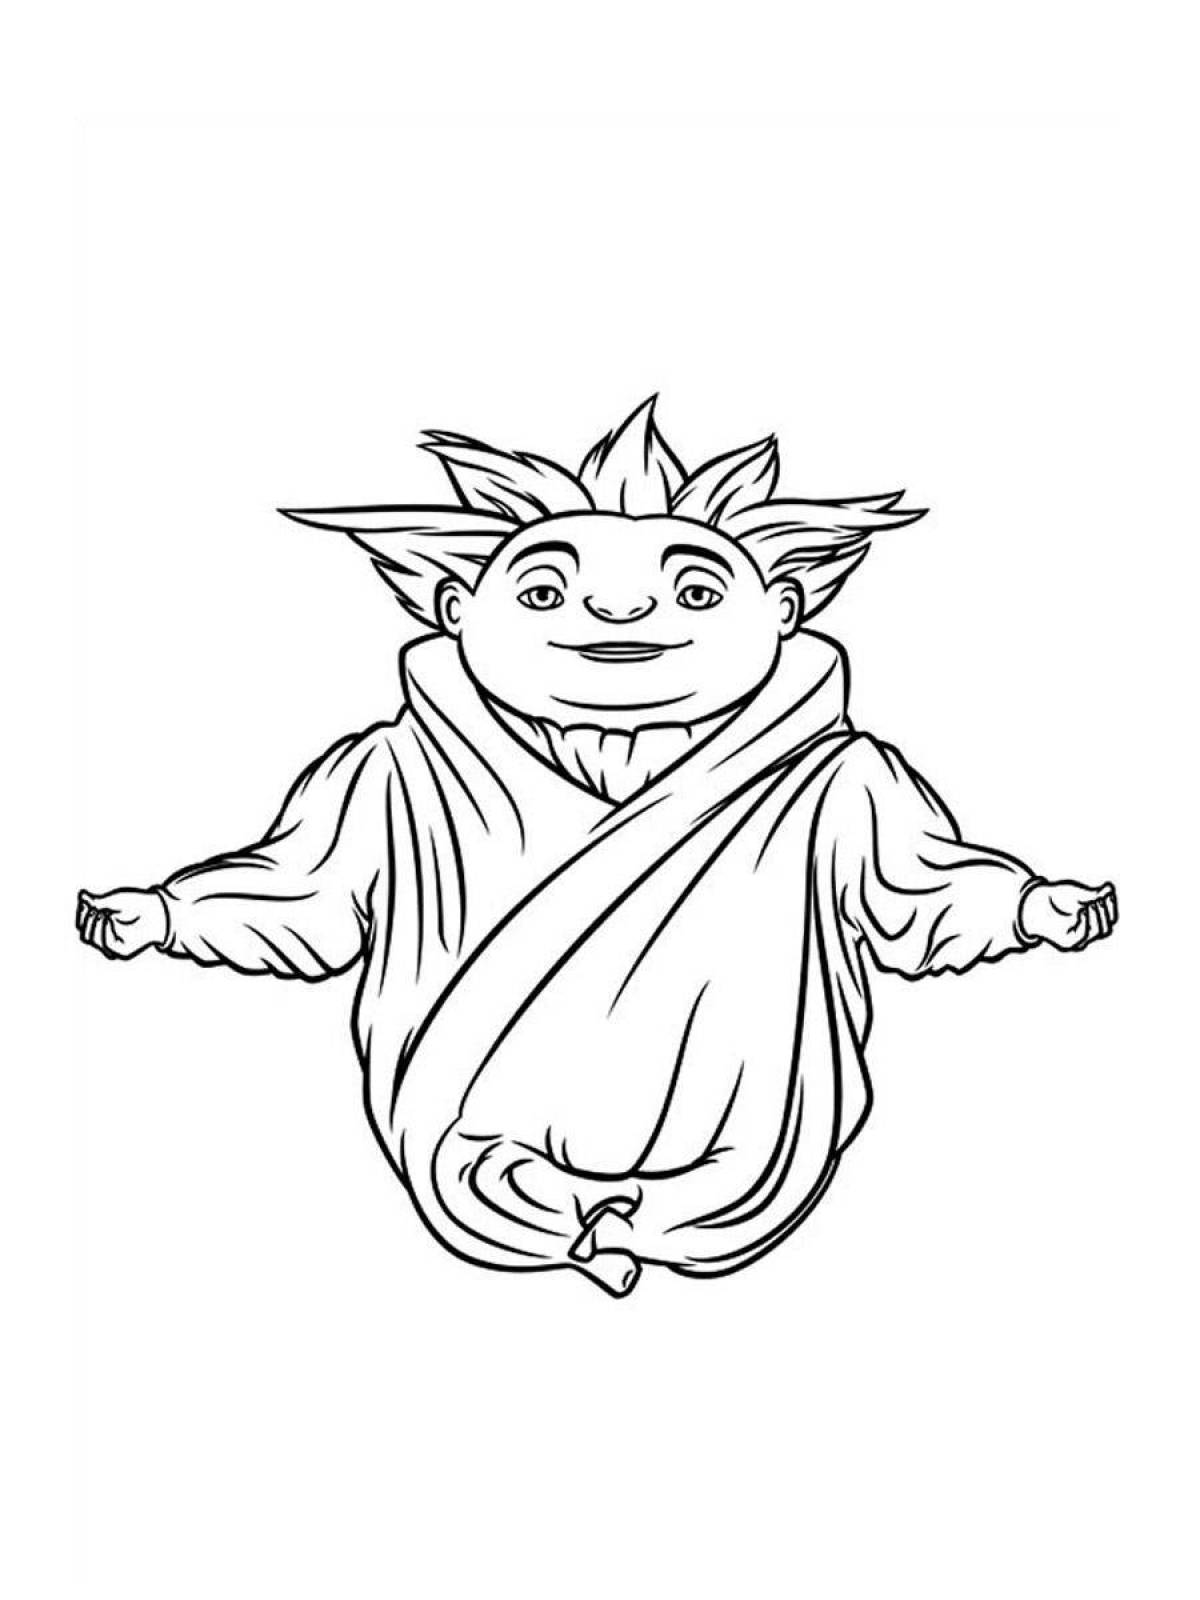 Unmentionable coloring page boogeyman